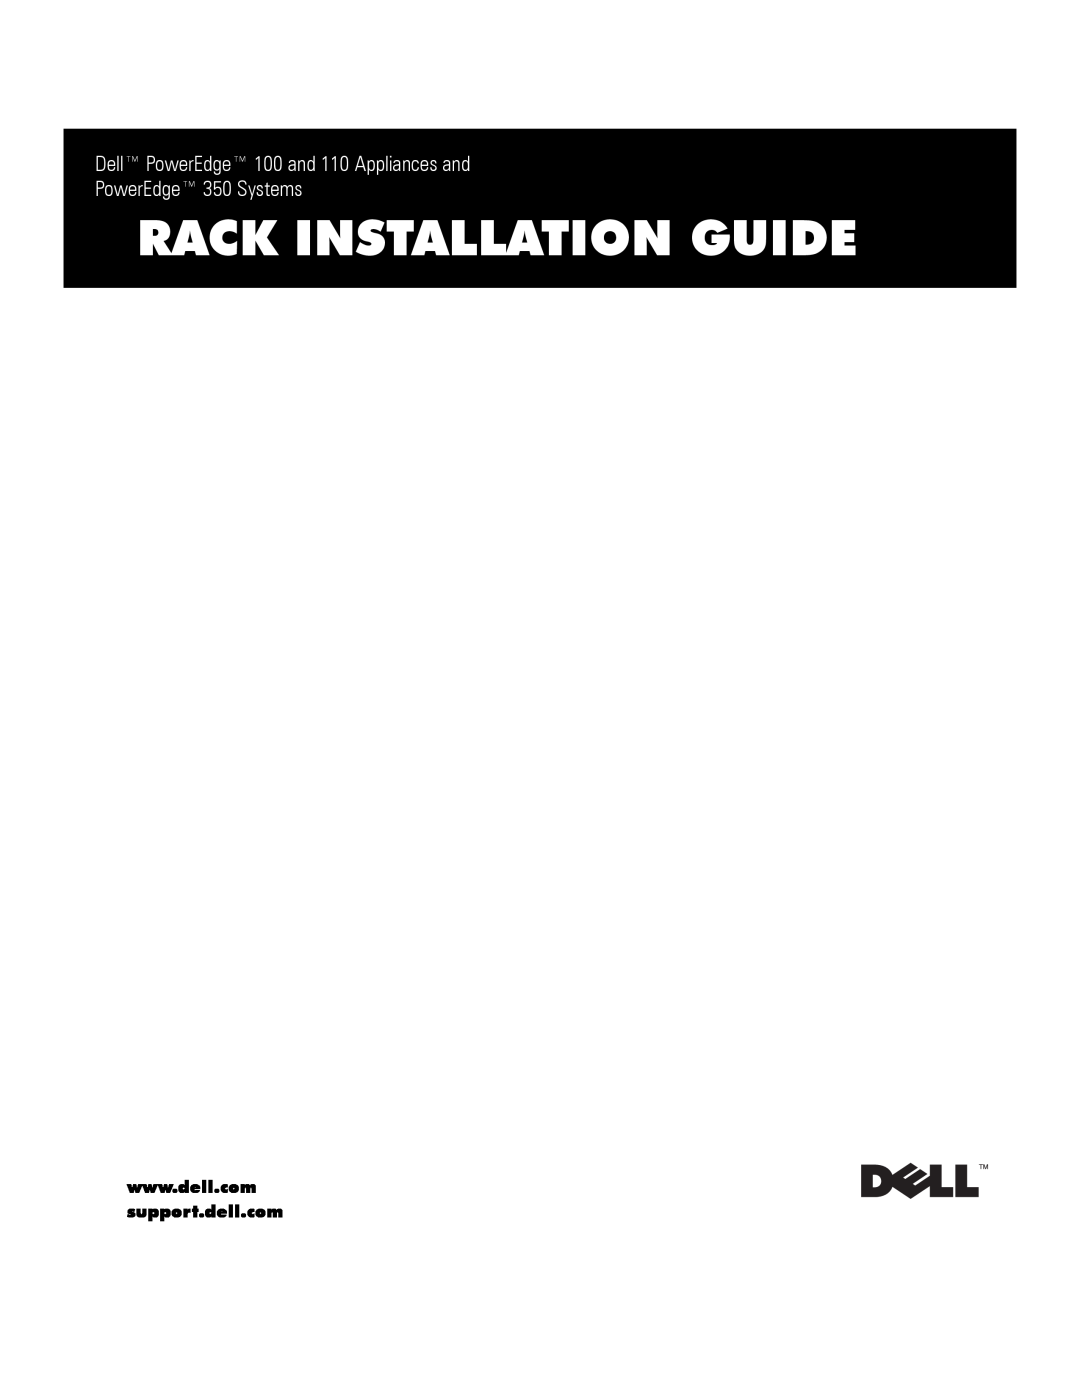 Dell manual Rack Installation Guide, Dell PowerEdge 100 and 110 Appliances and, PowerEdge 350 Systems 